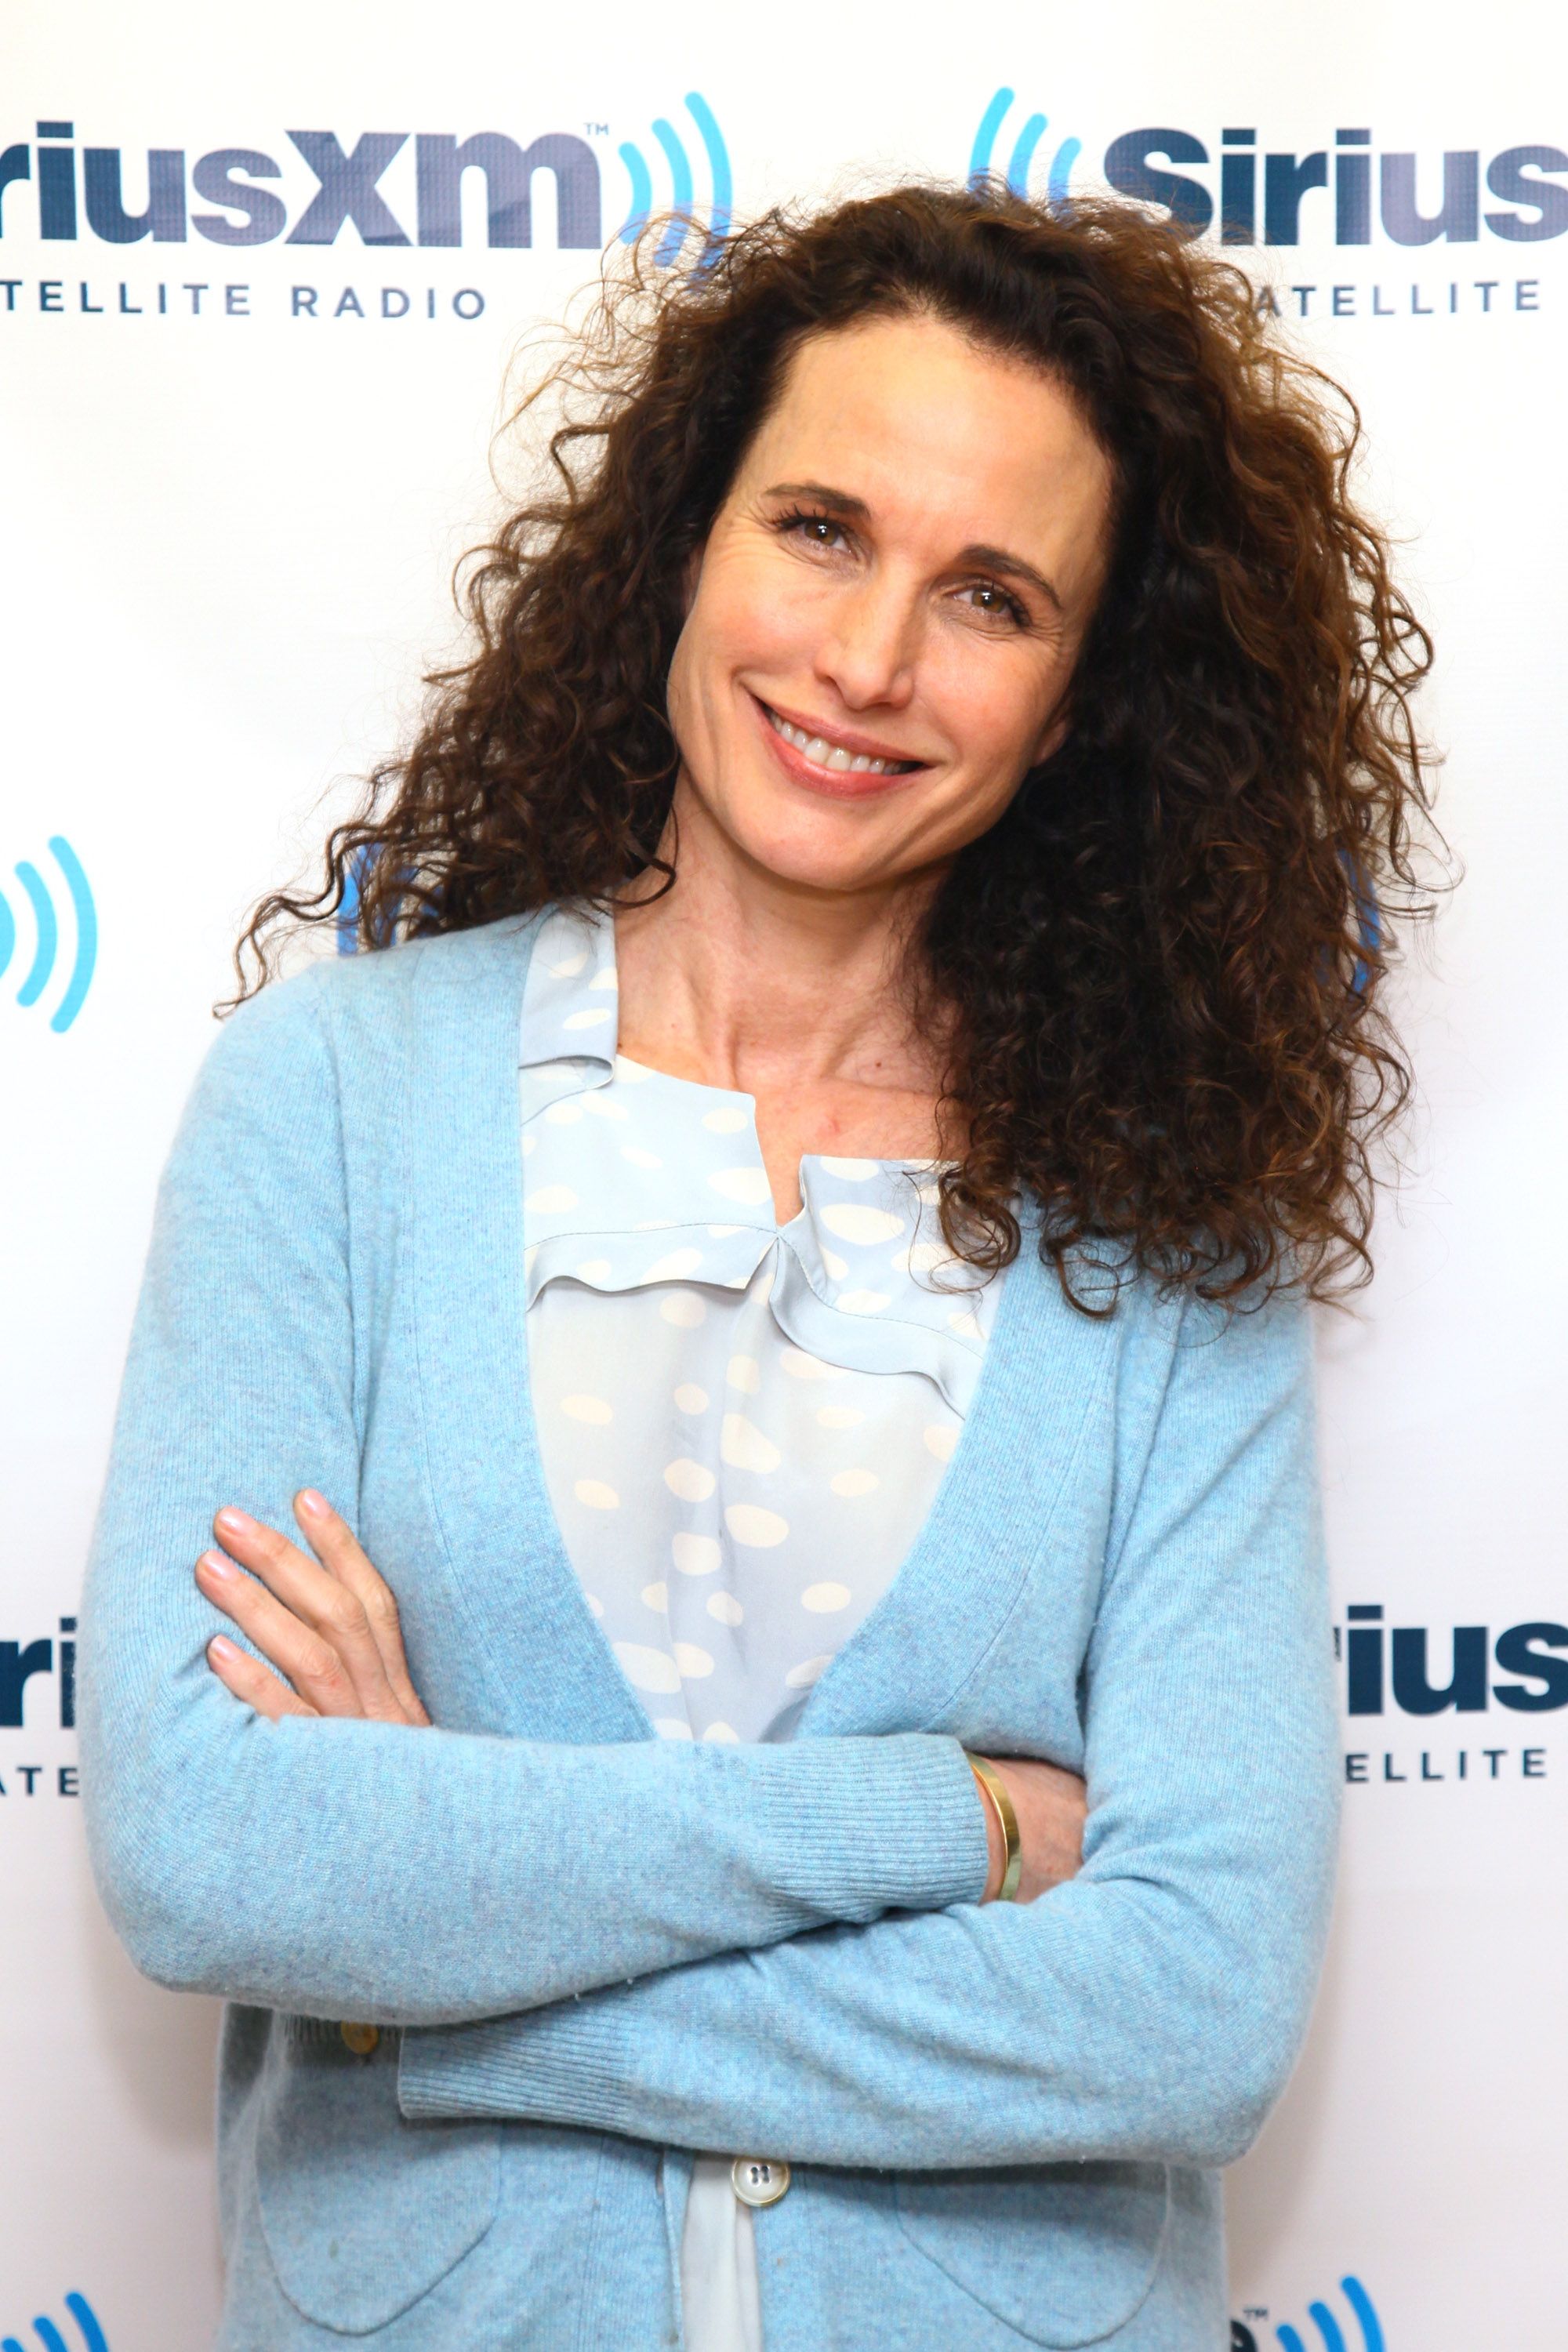 Andie MacDowell in den SiriusXM Studios am 7. Februar 2012 in New York City. | Quelle: Getty Images